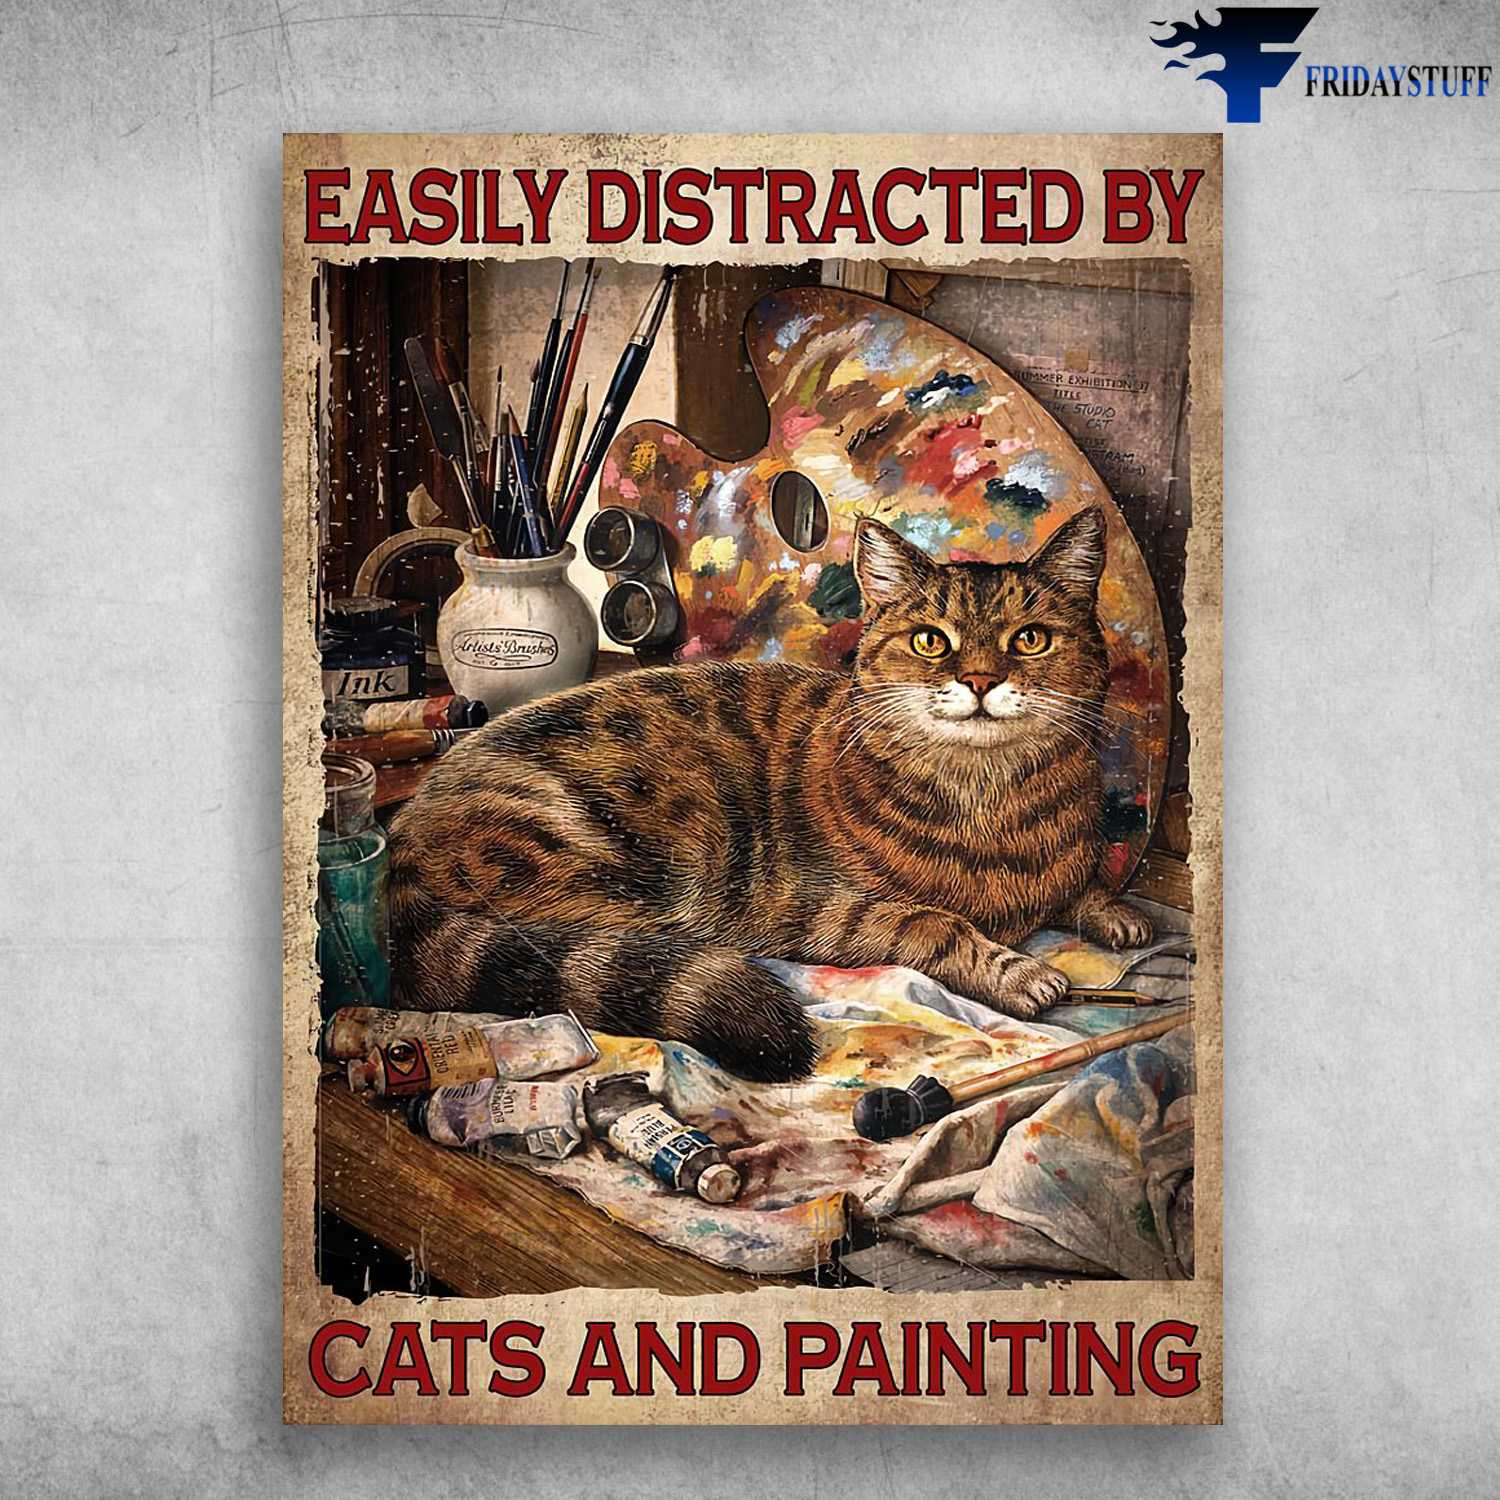 Cat Lover, Painting Poster, Easily Distracted By, Cats And Painting